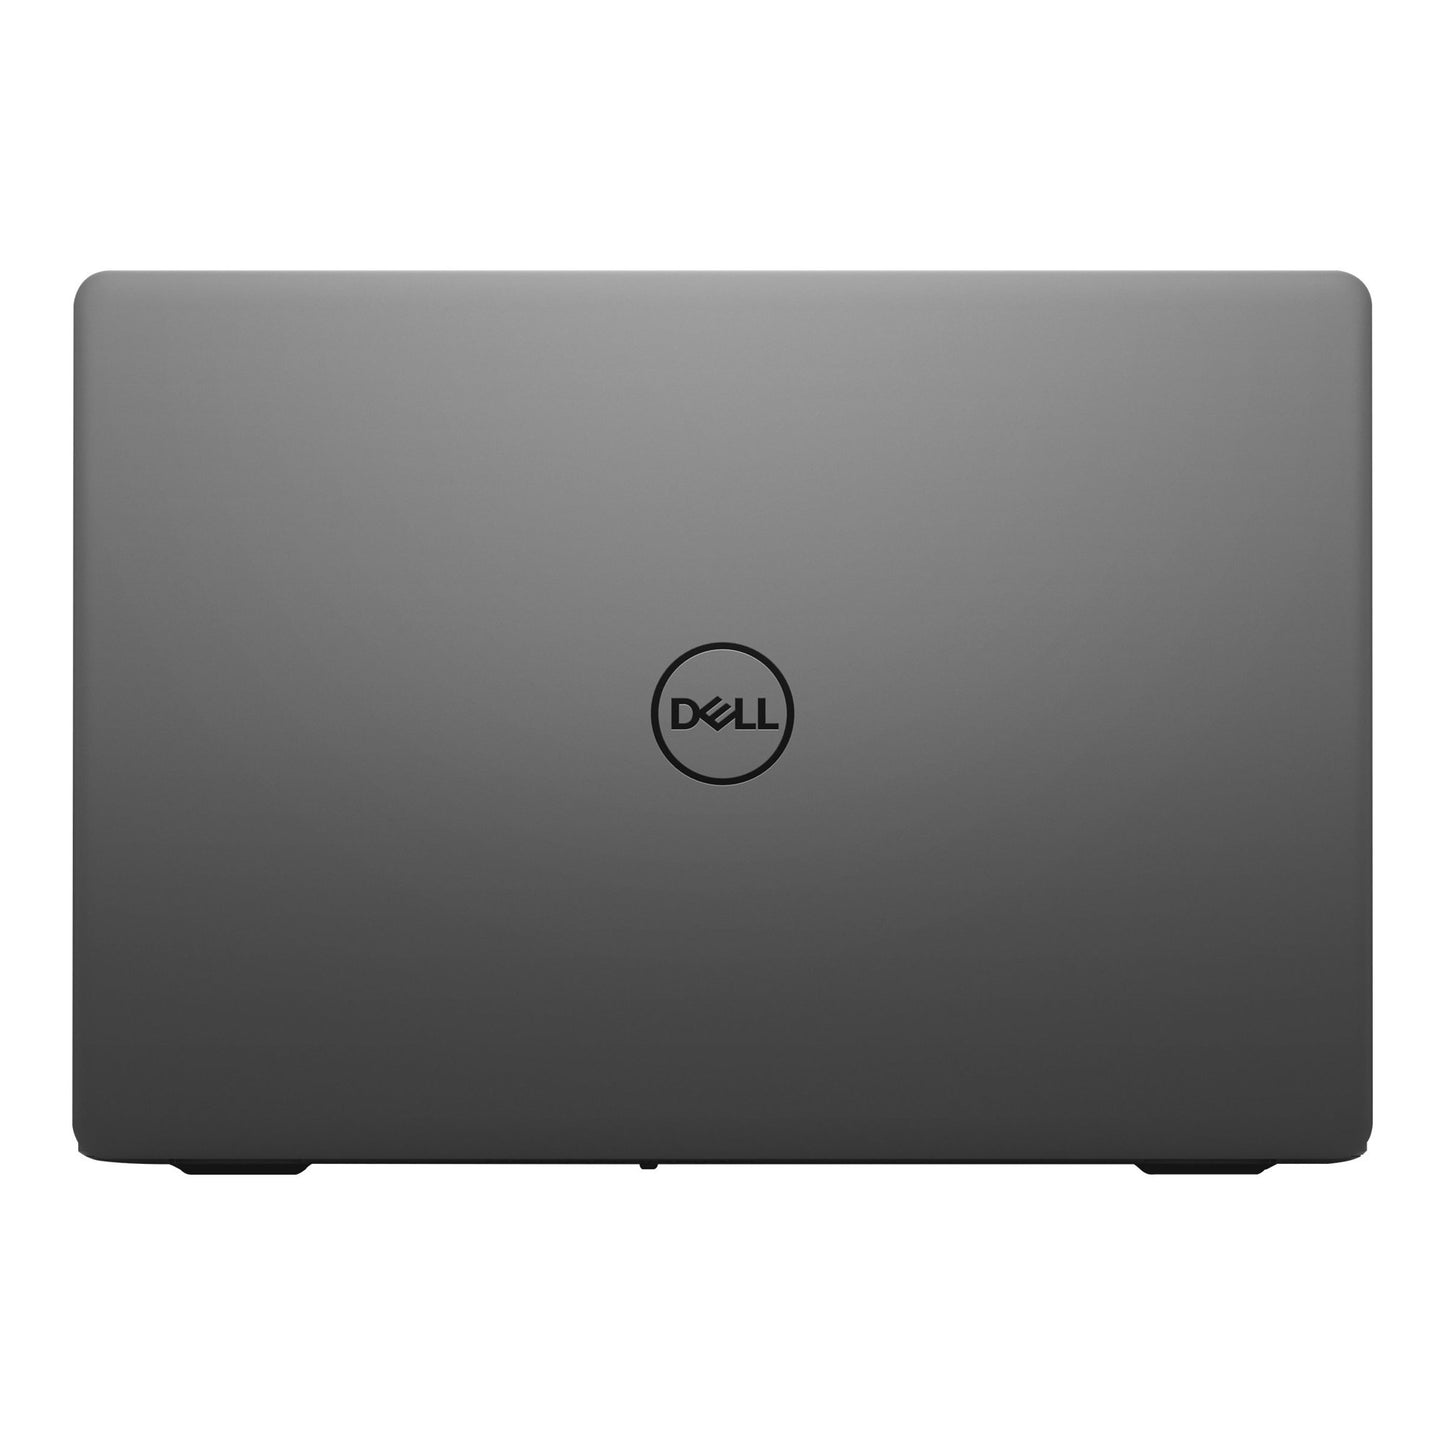 Dell Inspiron 3501 i5-1135G7 VGA Iris Xe Laptop Offers (New Open Box) Gaming laptop, Graphic Design laptop, best laptop for gaming, best laptop for graphic design, computer for sale Lebanon, laptop for video editing in Lebanon, laptop for sale Lebanon, best graphic design laptop,	best video editing laptop, best programming laptop, laptop for sale in Lebanon, laptops for sale in Lebanon, laptop for sale in Lebanon, buy computer Lebanon, buy laptop Lebanon.